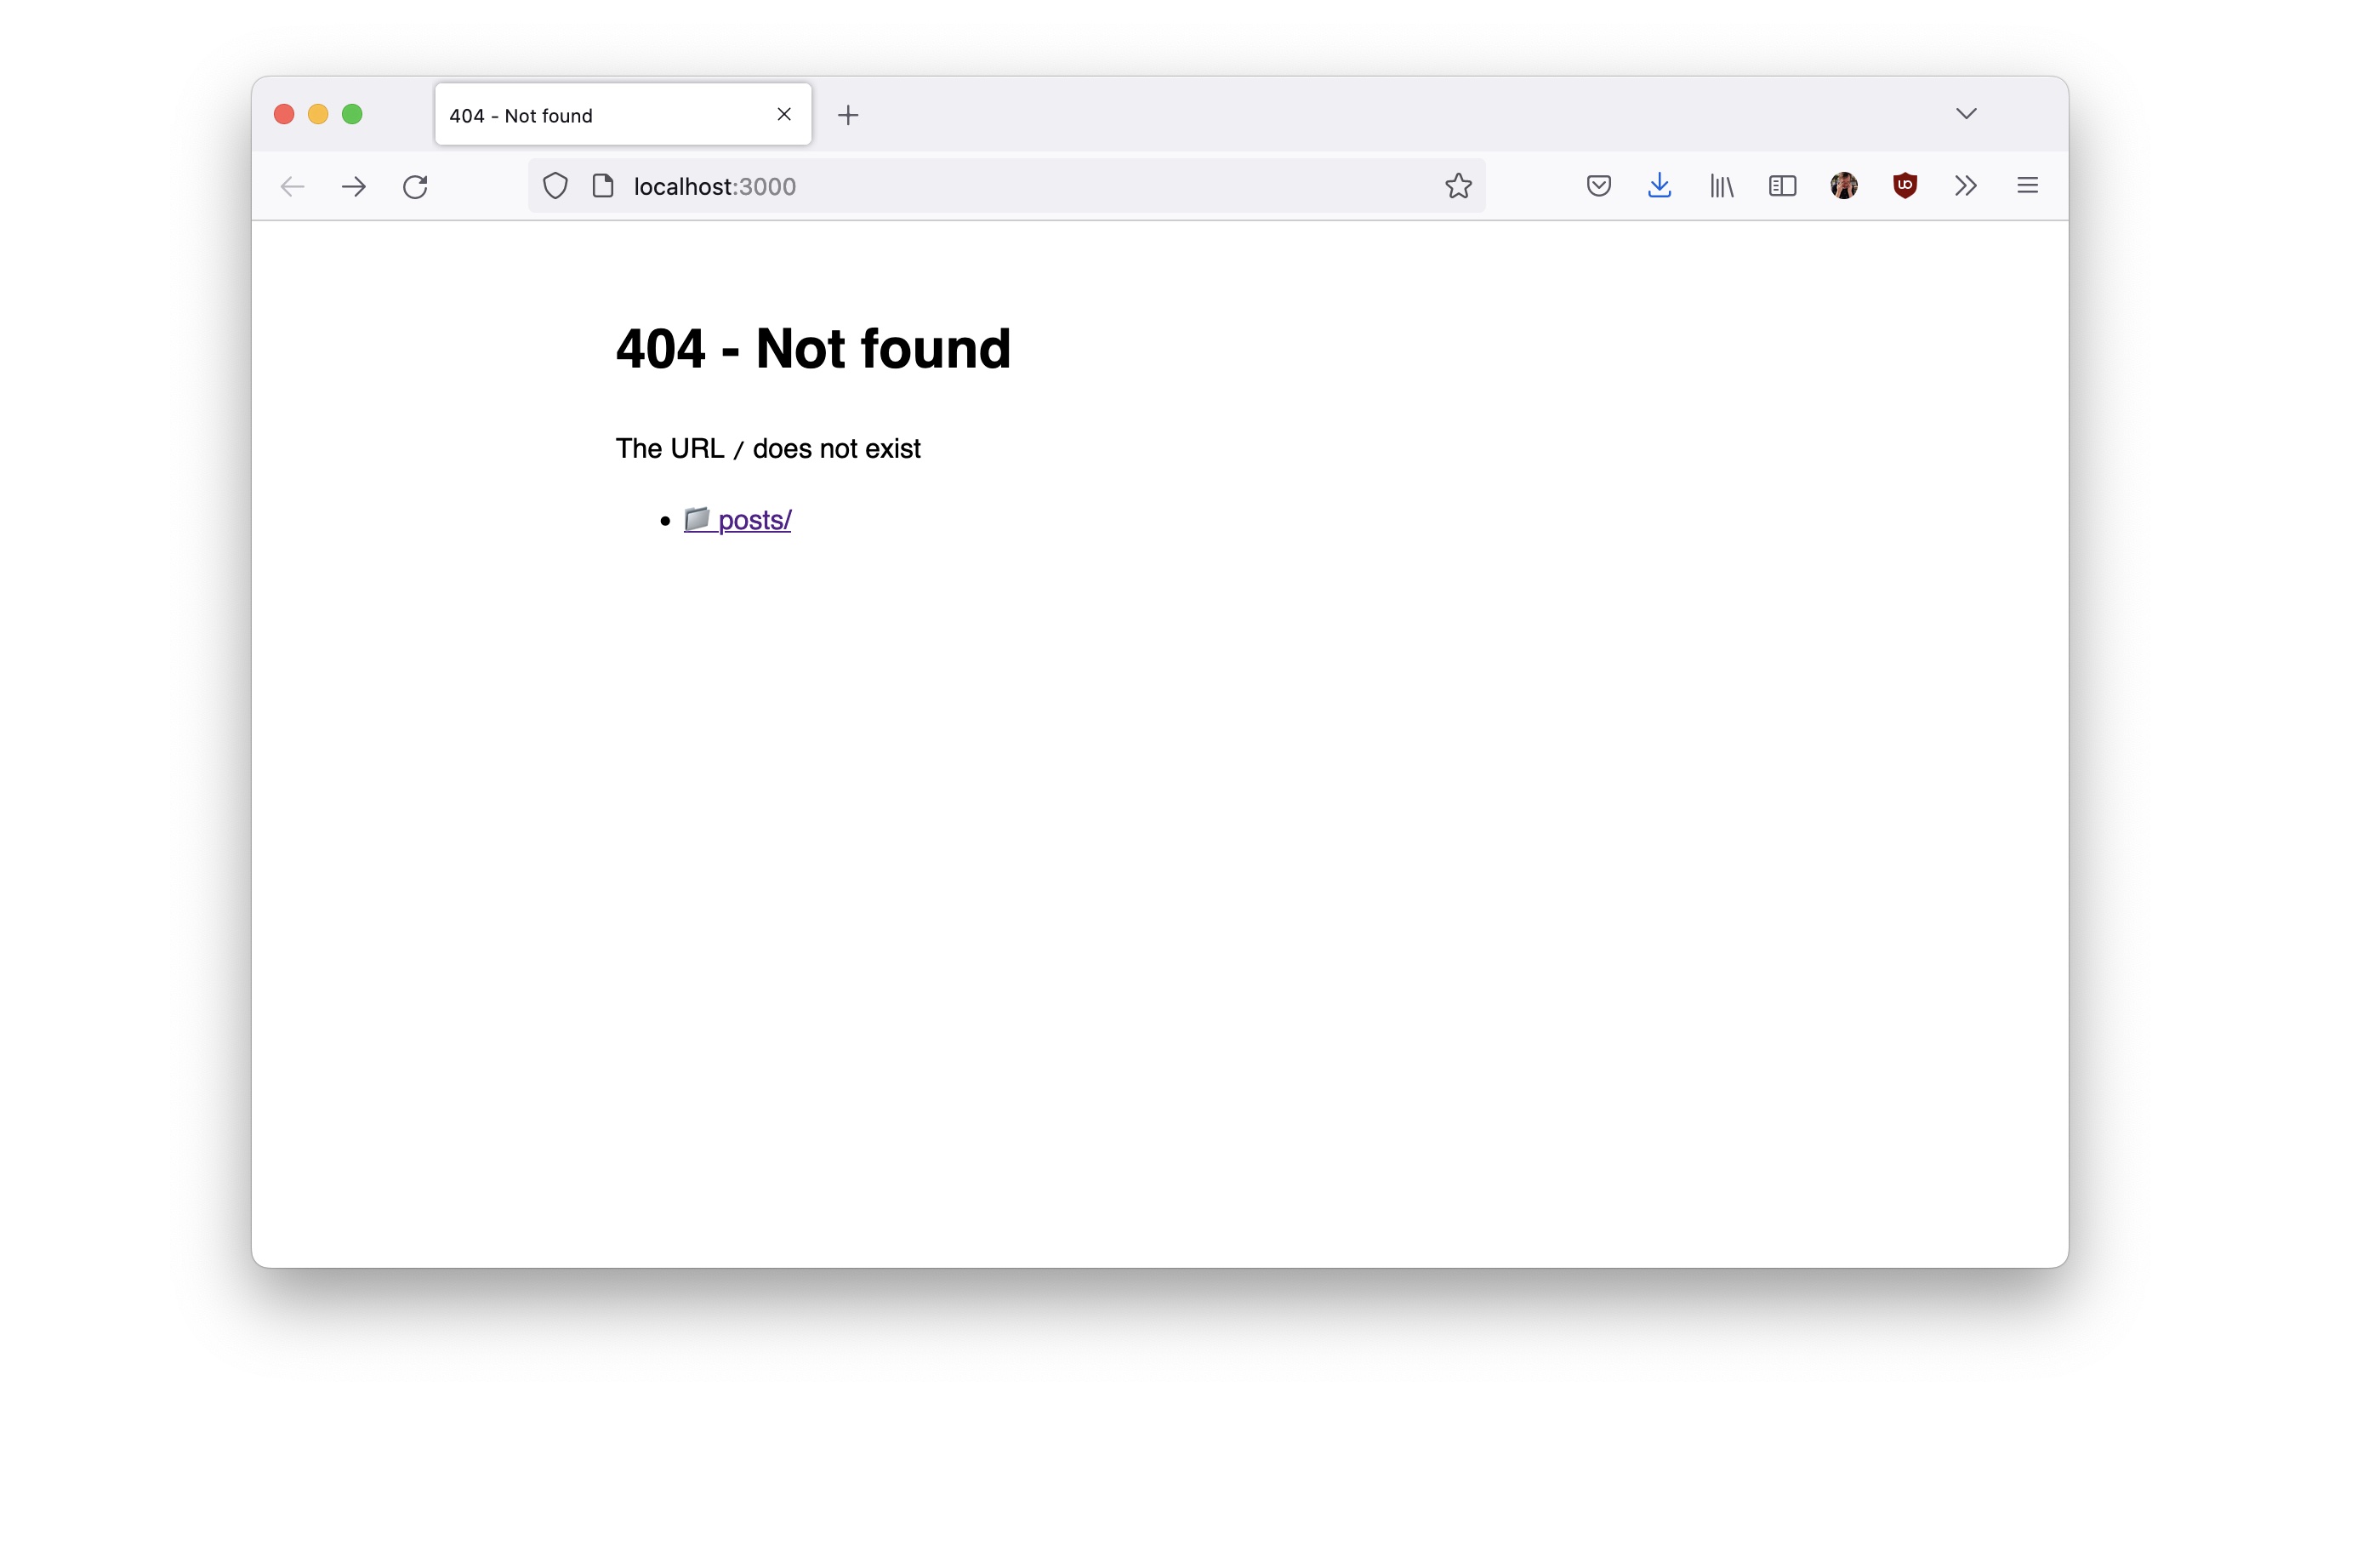 Getting a 404 page not found